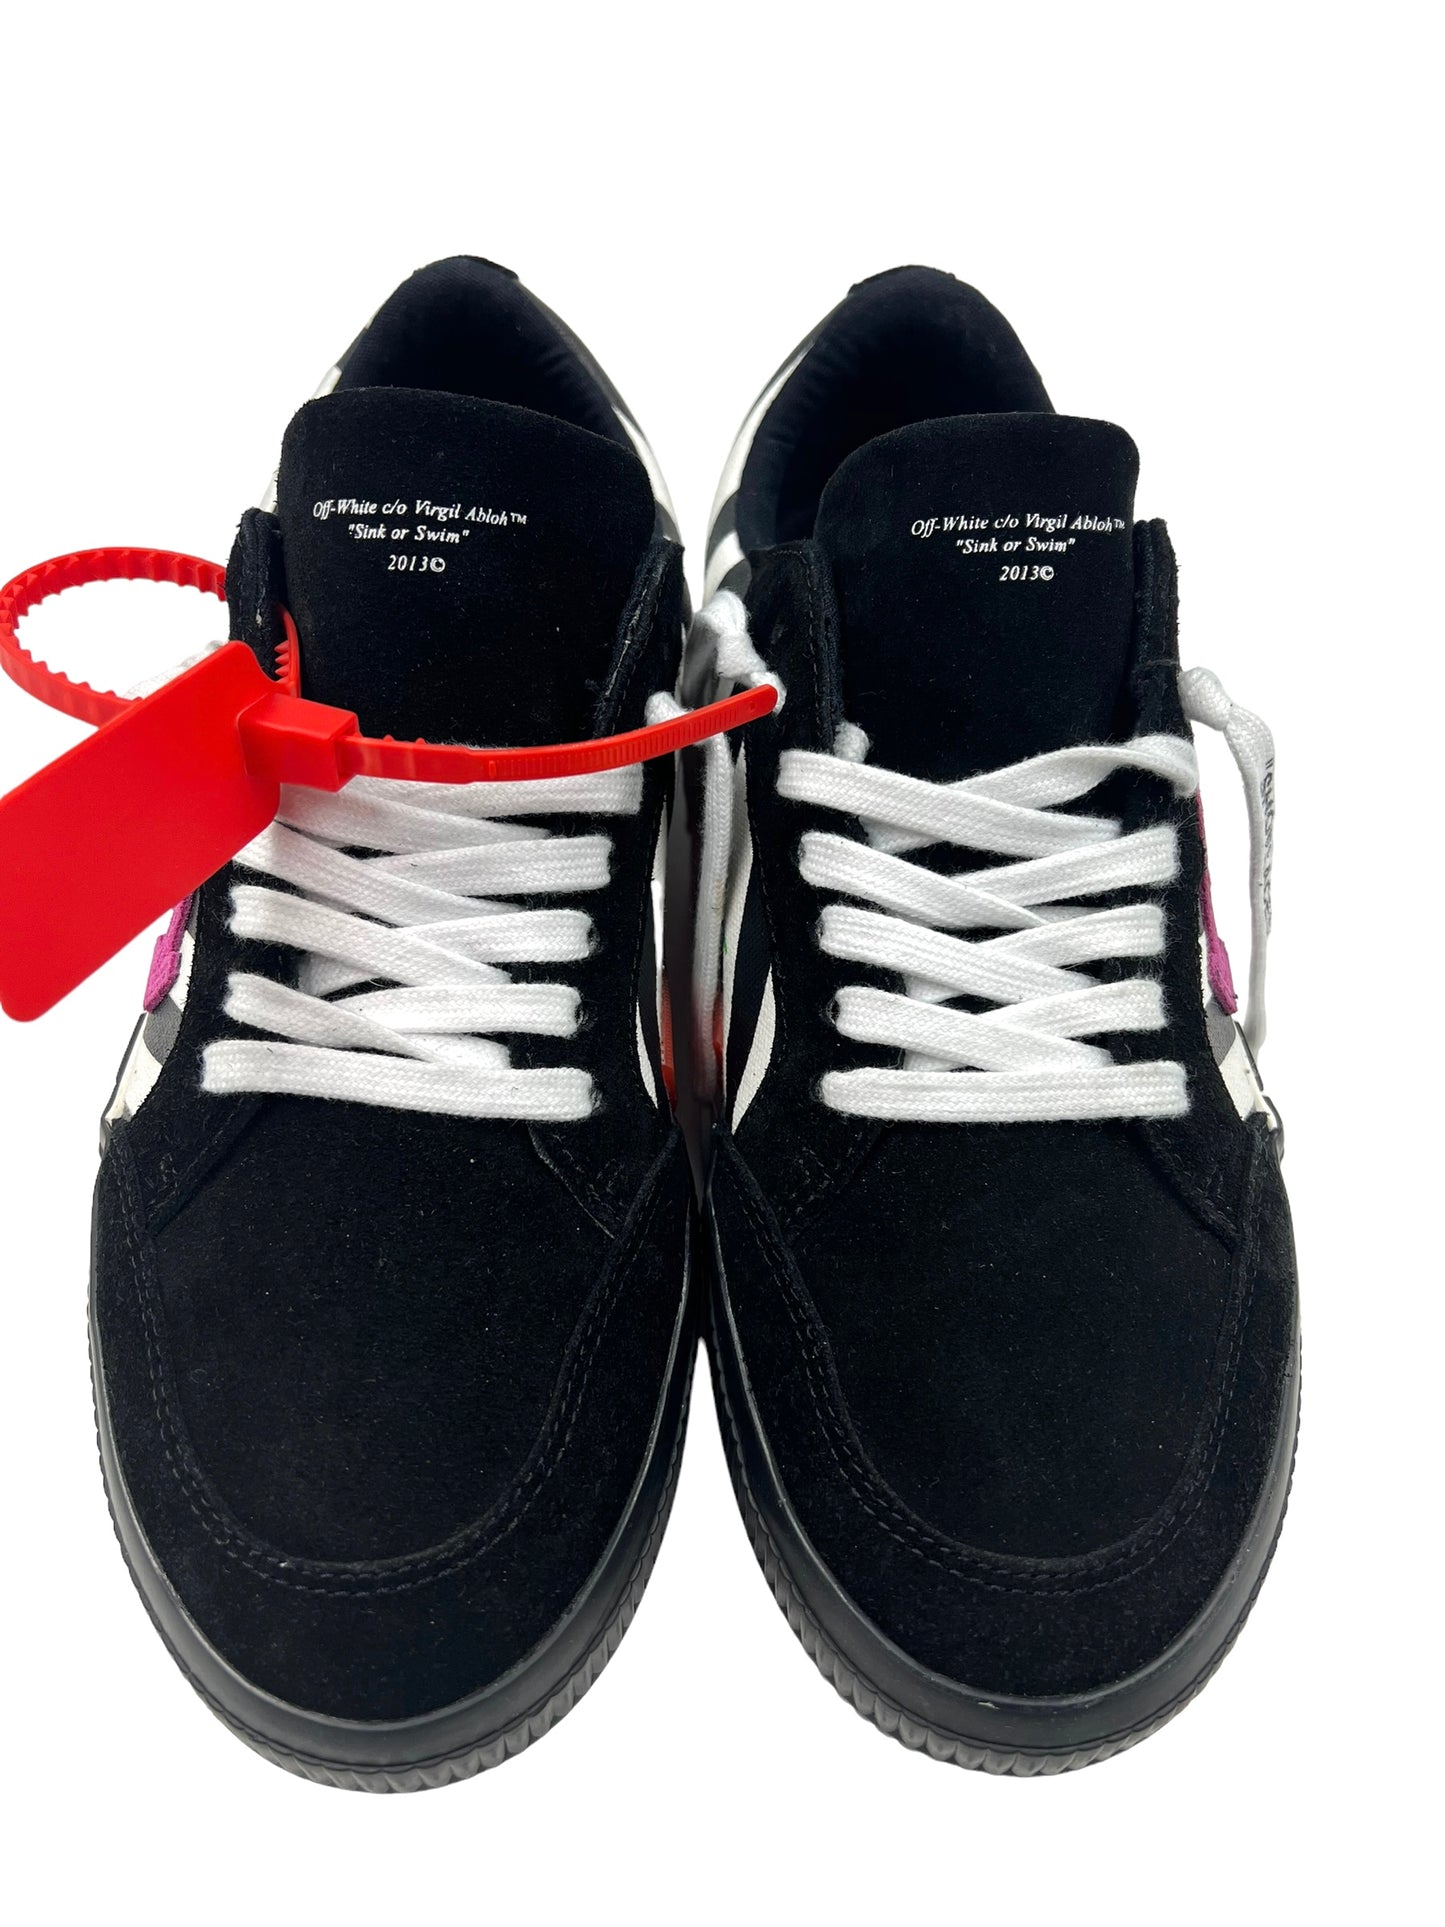 Off White Size 39 Black & White Suede Arrow Low Vulcanized Sneakers